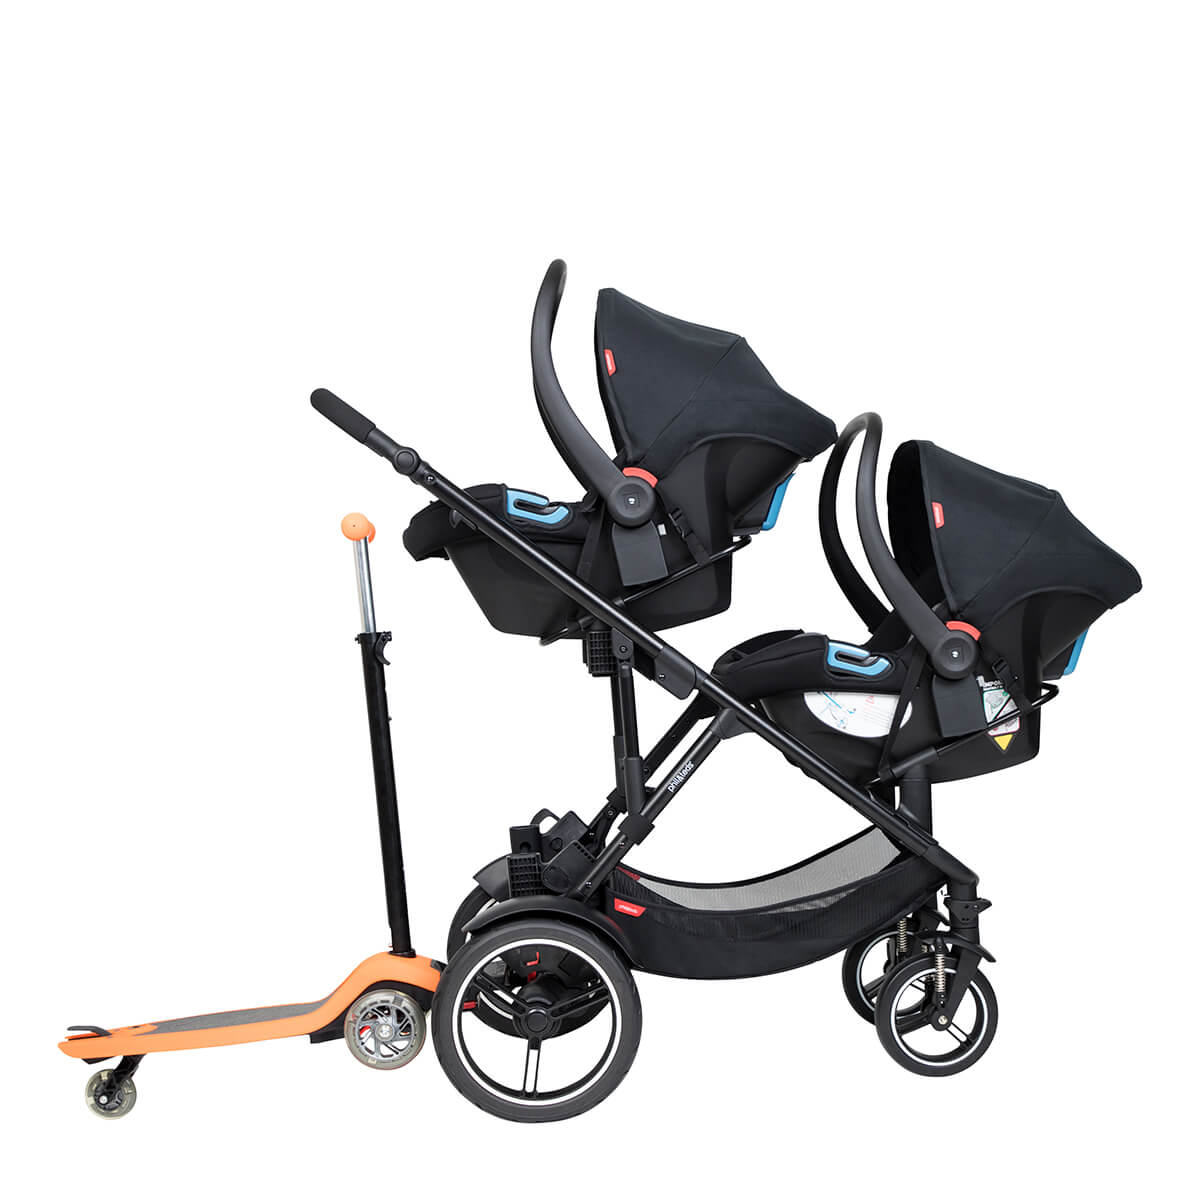 https://cdn.accentuate.io/7566351007938/19466498146498/philteds-voyager-buggy-with-double-travel-systems-and-freerider-stroller-board-in-the-rear-v1669337528068.jpg?1200x1200